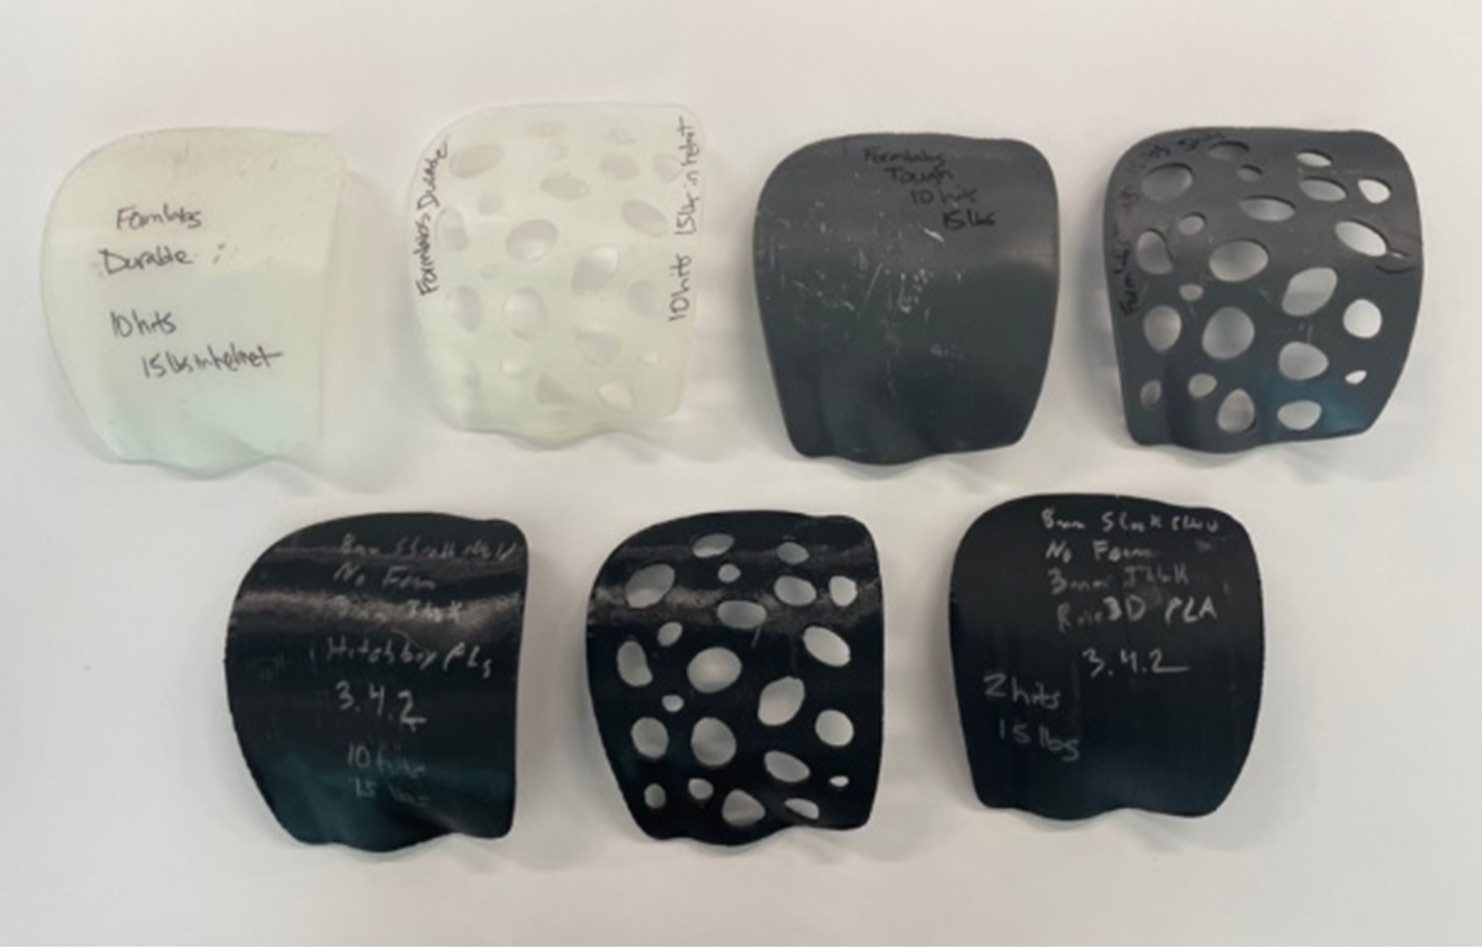 Figure 2. Shoulder Guards: (Top Row, Left to Right) Formlabs Durable Solid, Durable Holed, Tough Solid, and Tough Holed and (Bottom Row, Left to Right) Hatchbox PLA Solid, Hatchbox PLA Holed, and Raise3D PLA Solid